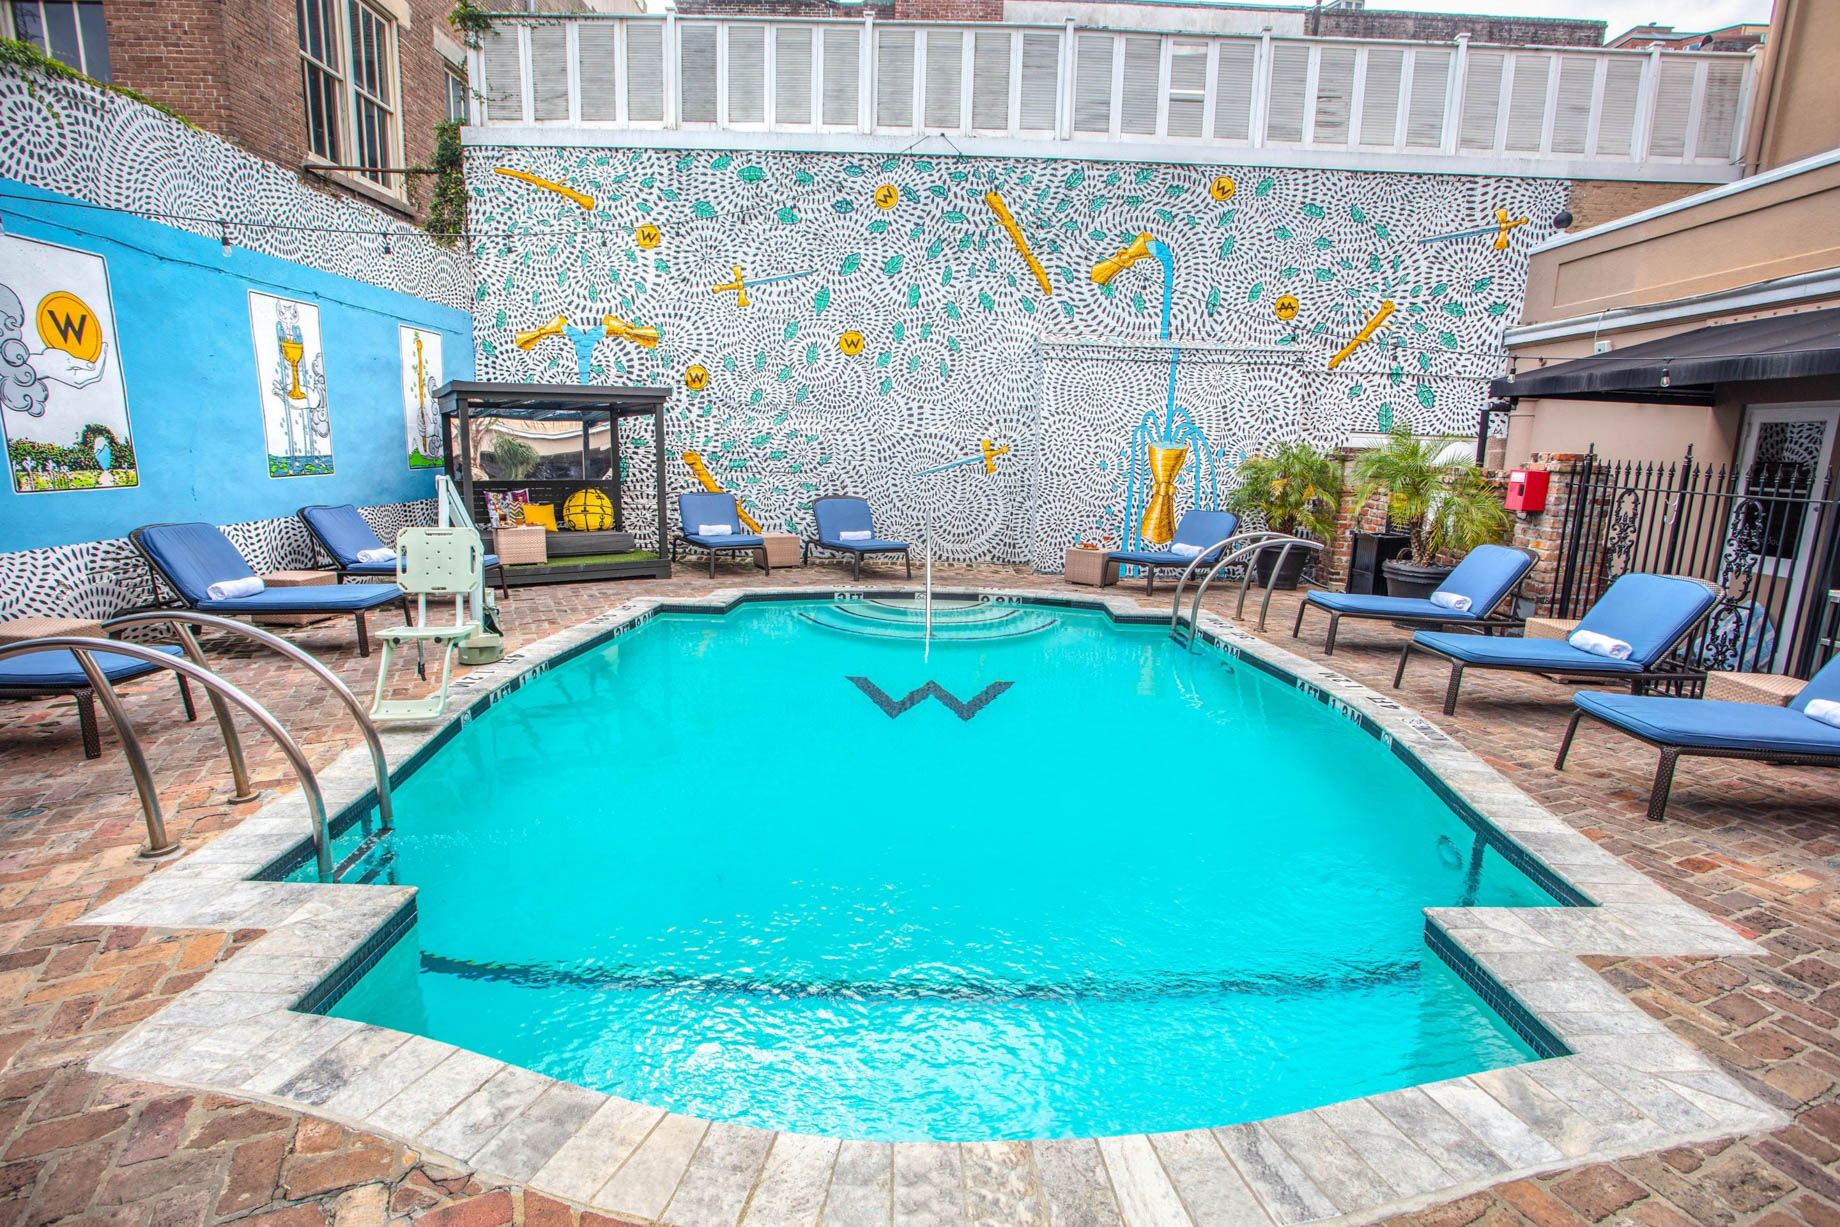 W New Orleans French Quarter Hotel – New Orleans, LA, USA – WET Deck Pool